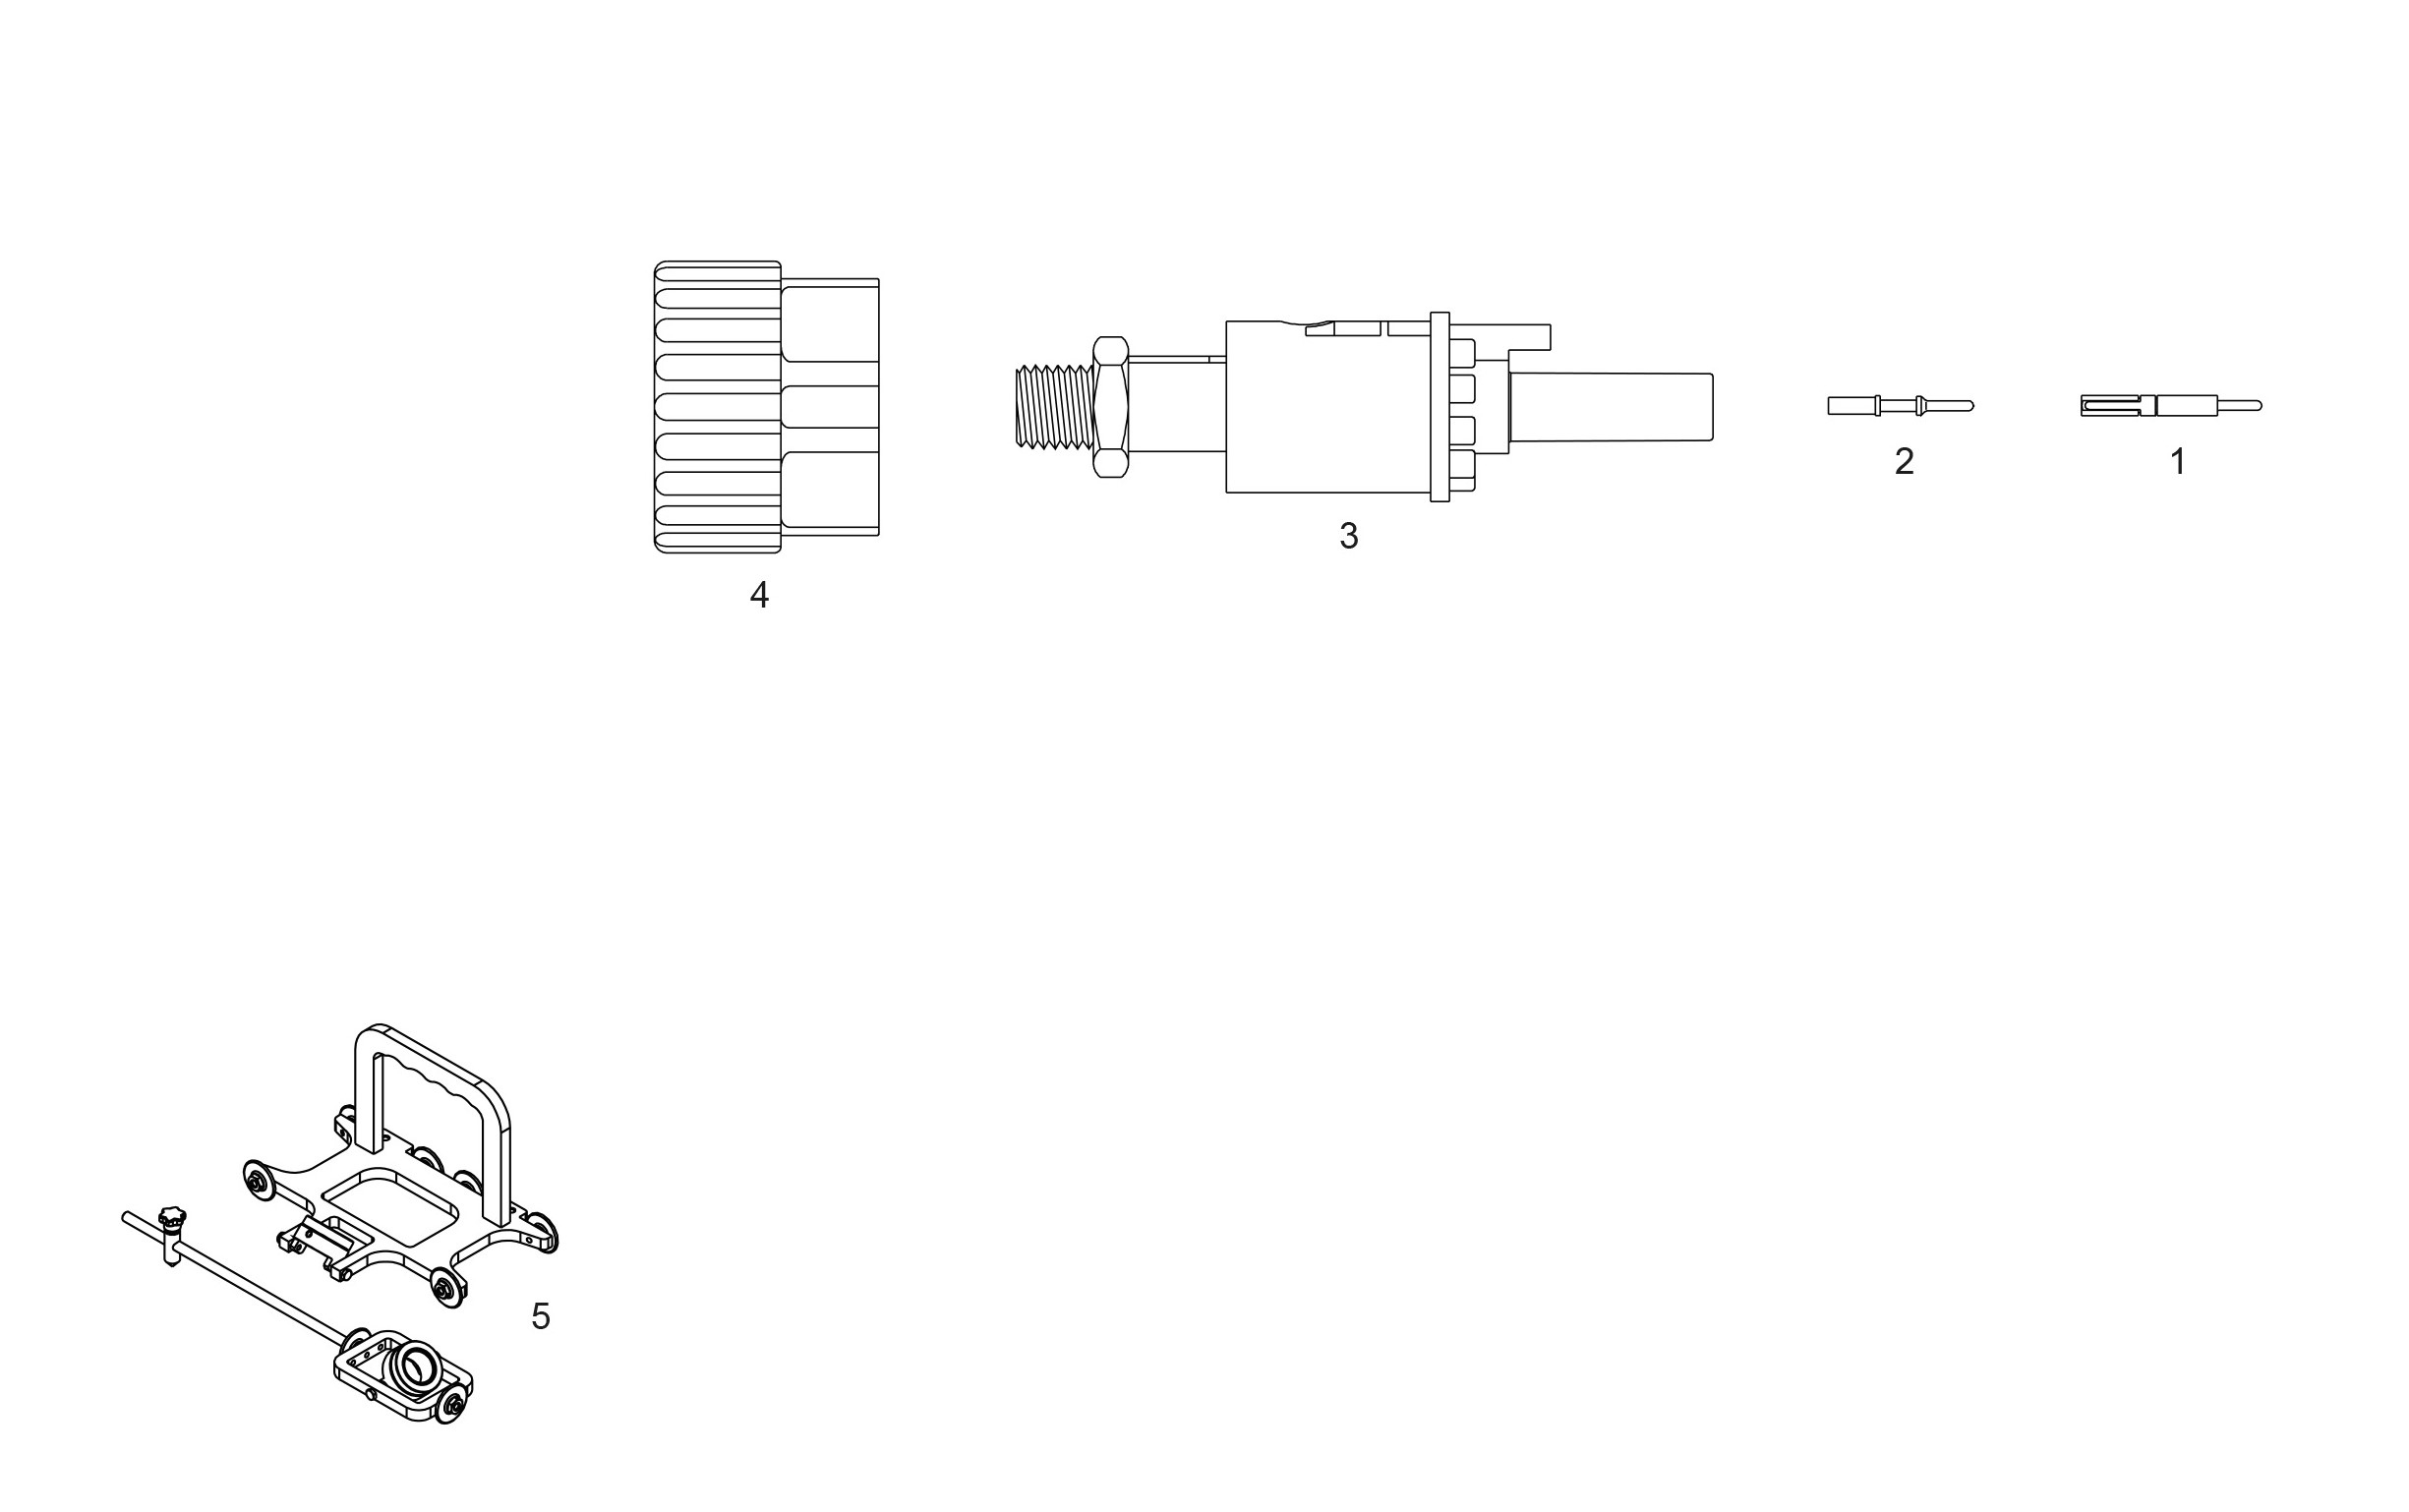 PLASMA TORCH ADAPTER COMPONENTS